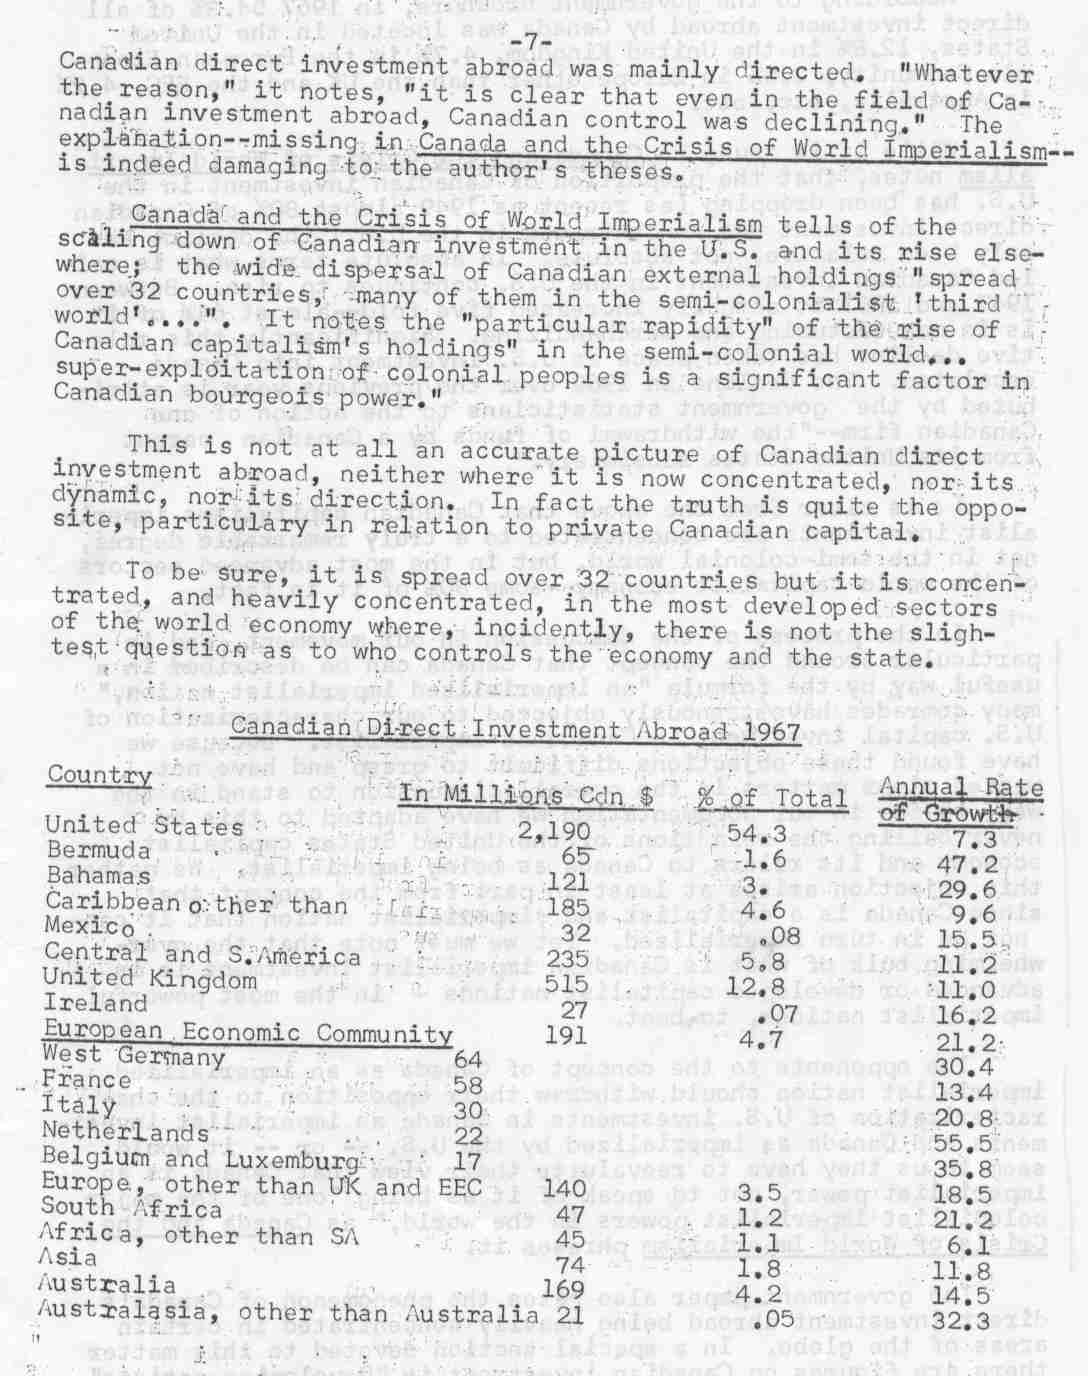 table, from the Department of Industry, Trade & Commerce, Direct Investment Abroad by Canada, 1946-67, February 1971